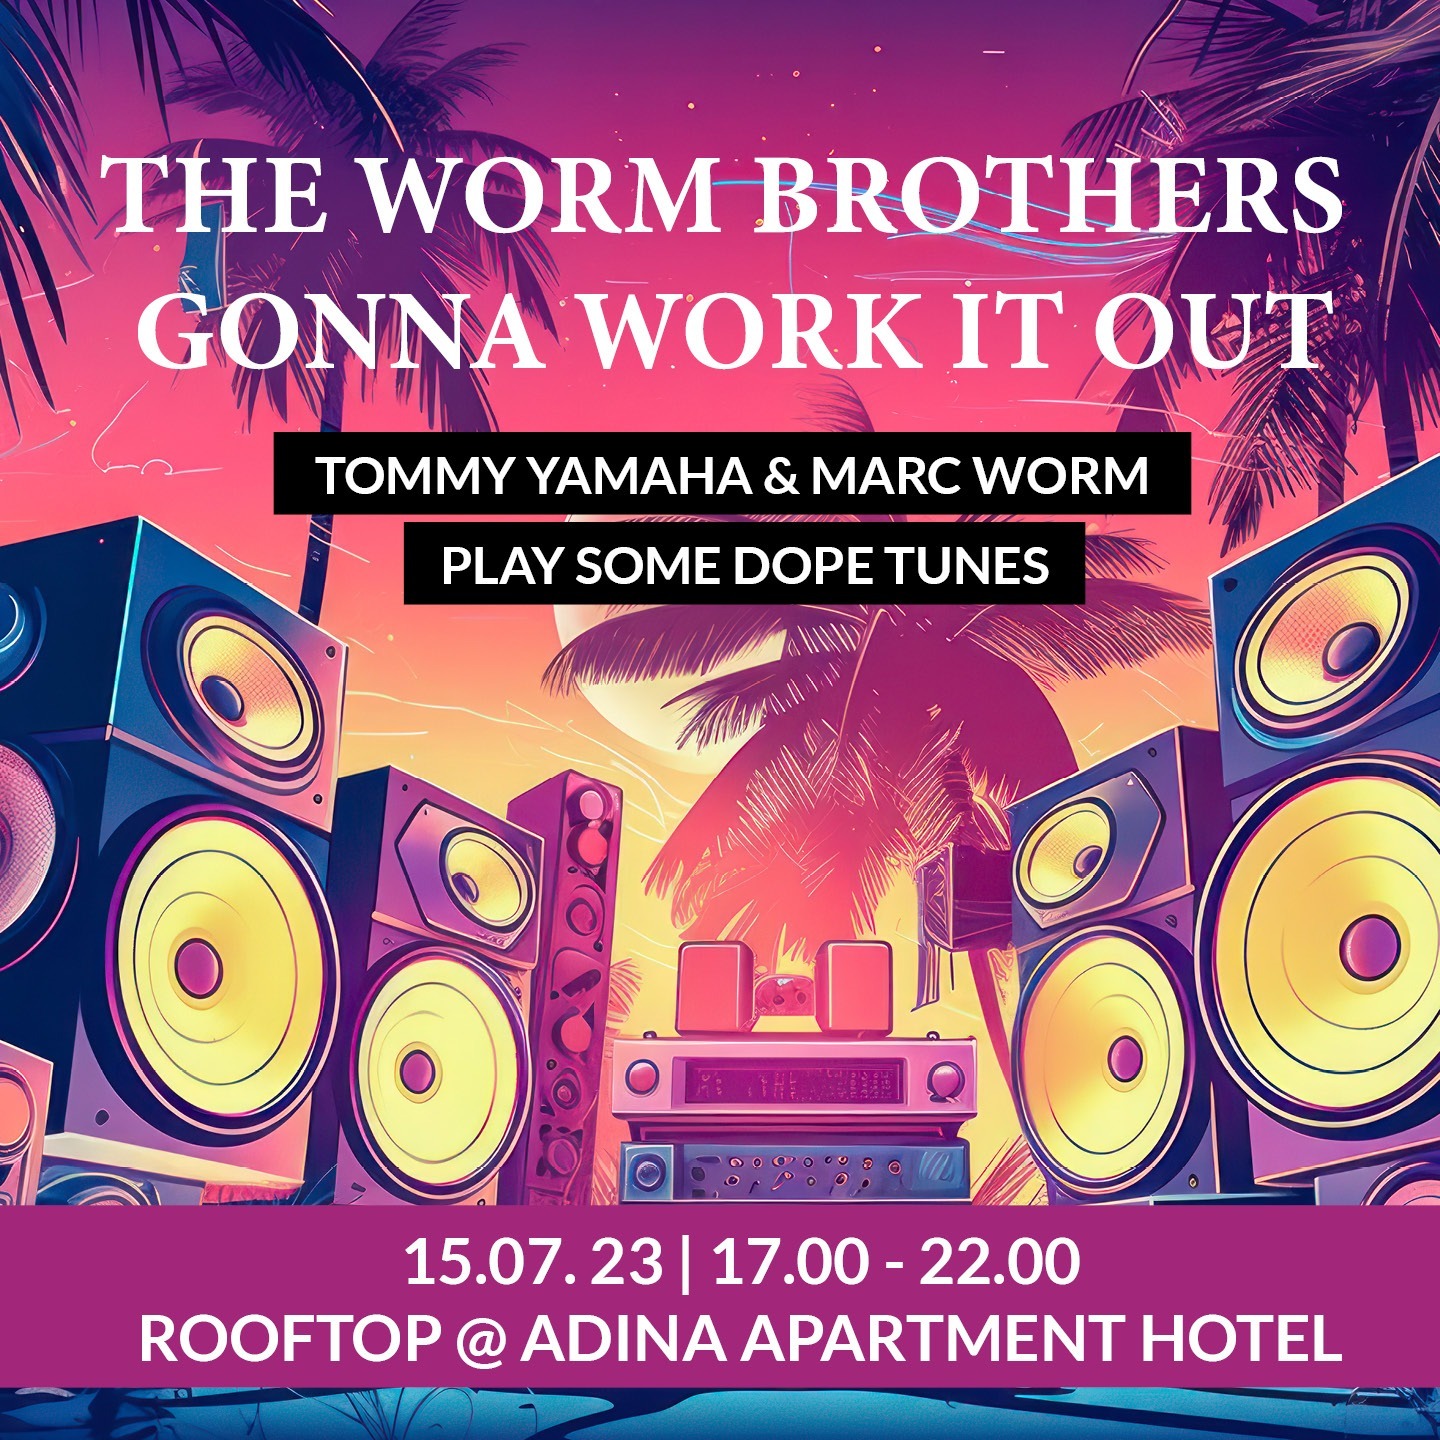 THE WORM BROTHERS GONNA WORK IT OUT